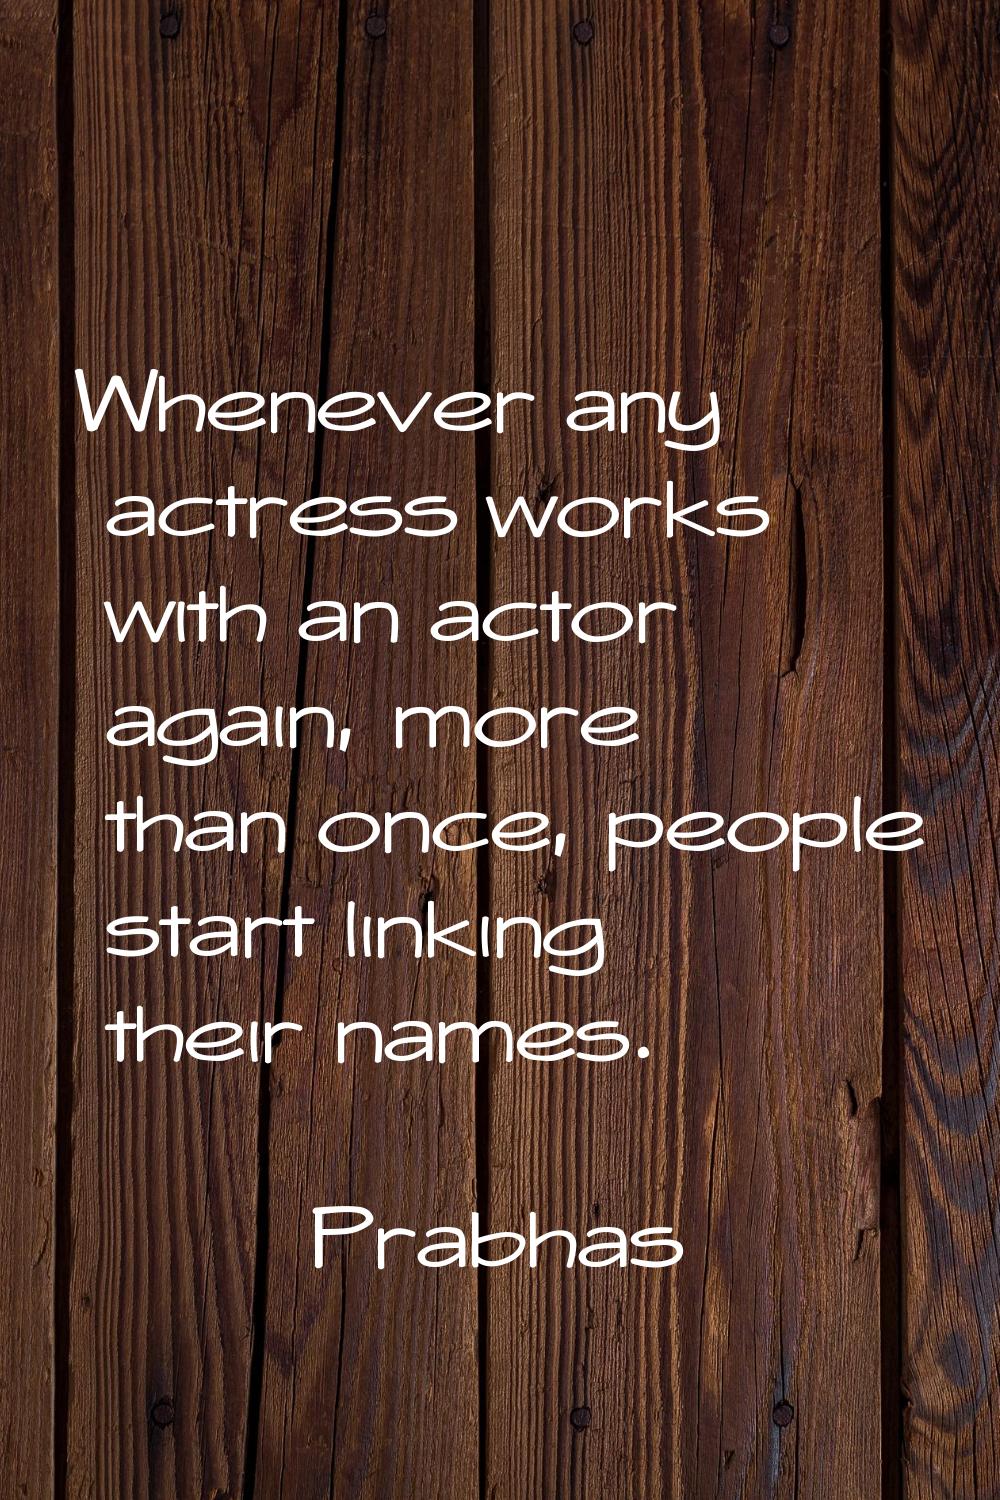 Whenever any actress works with an actor again, more than once, people start linking their names.